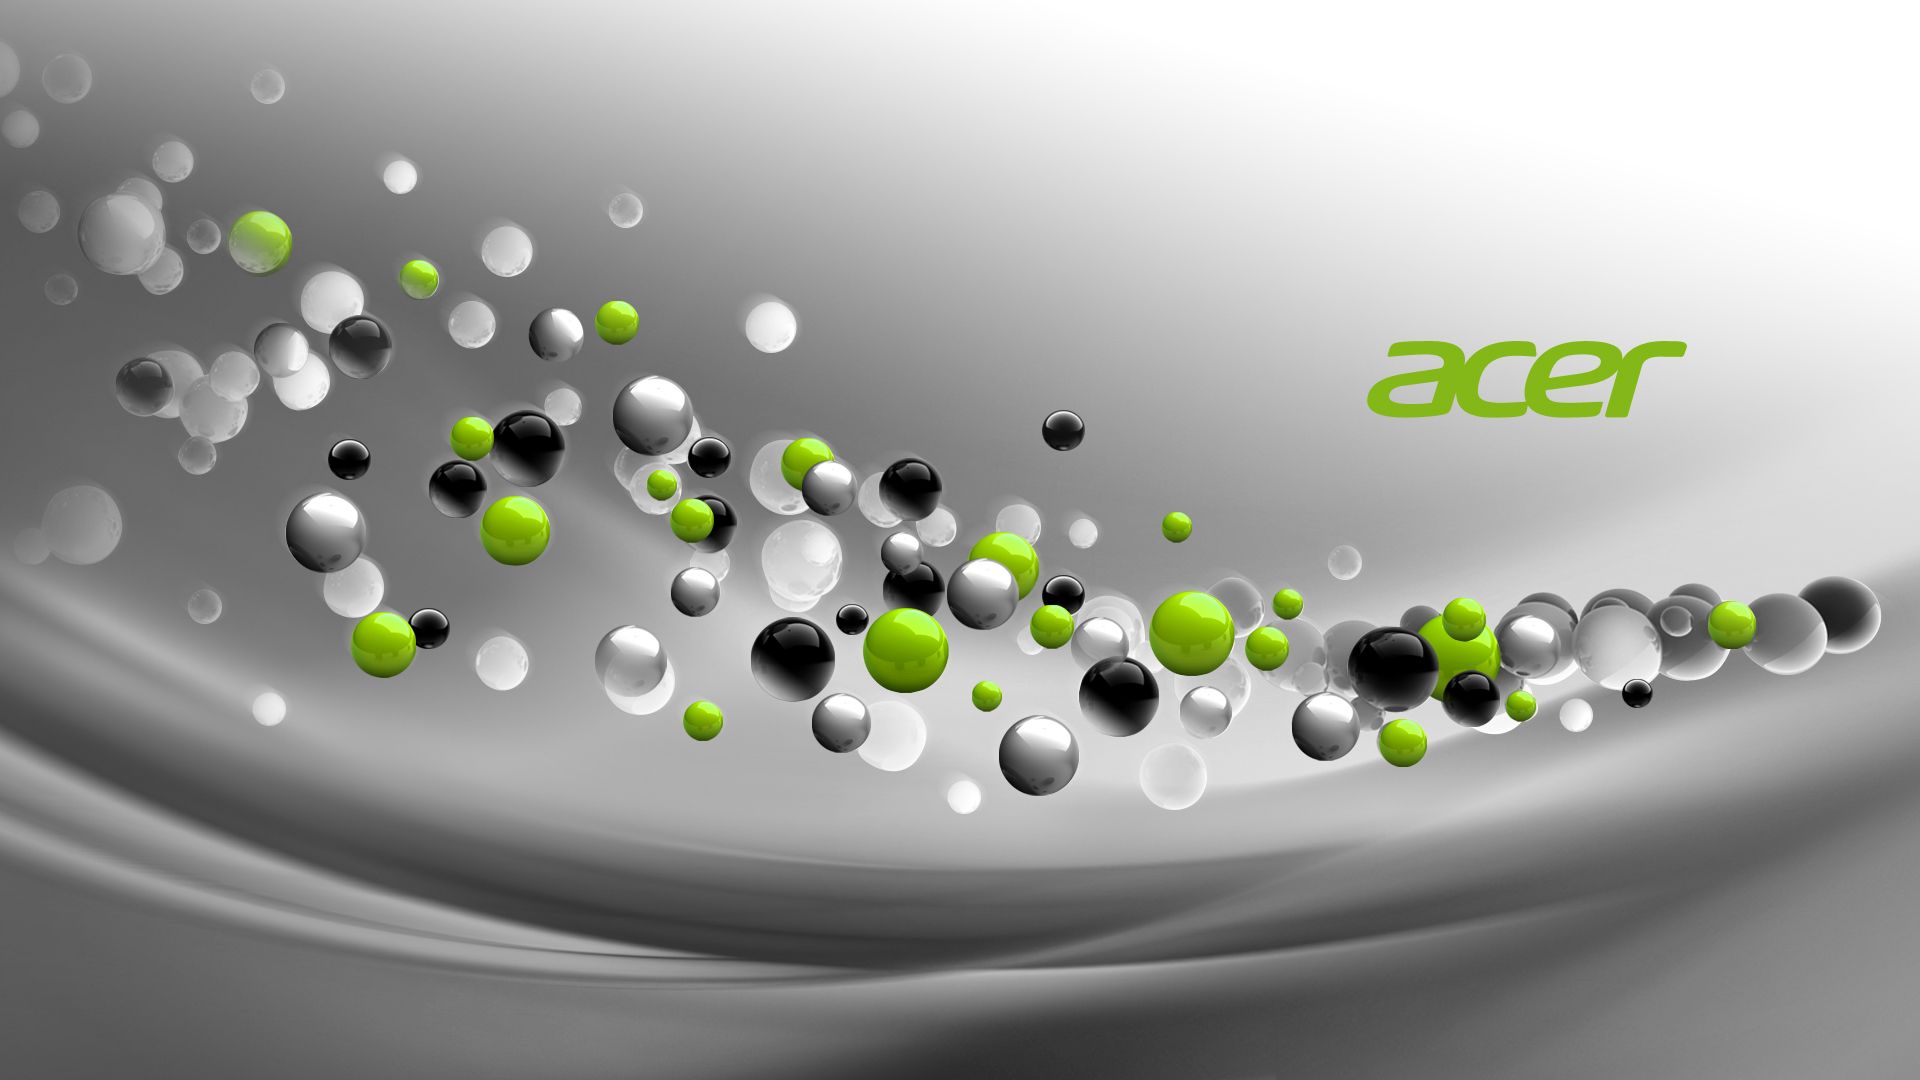 Acer Aspire wallpapers